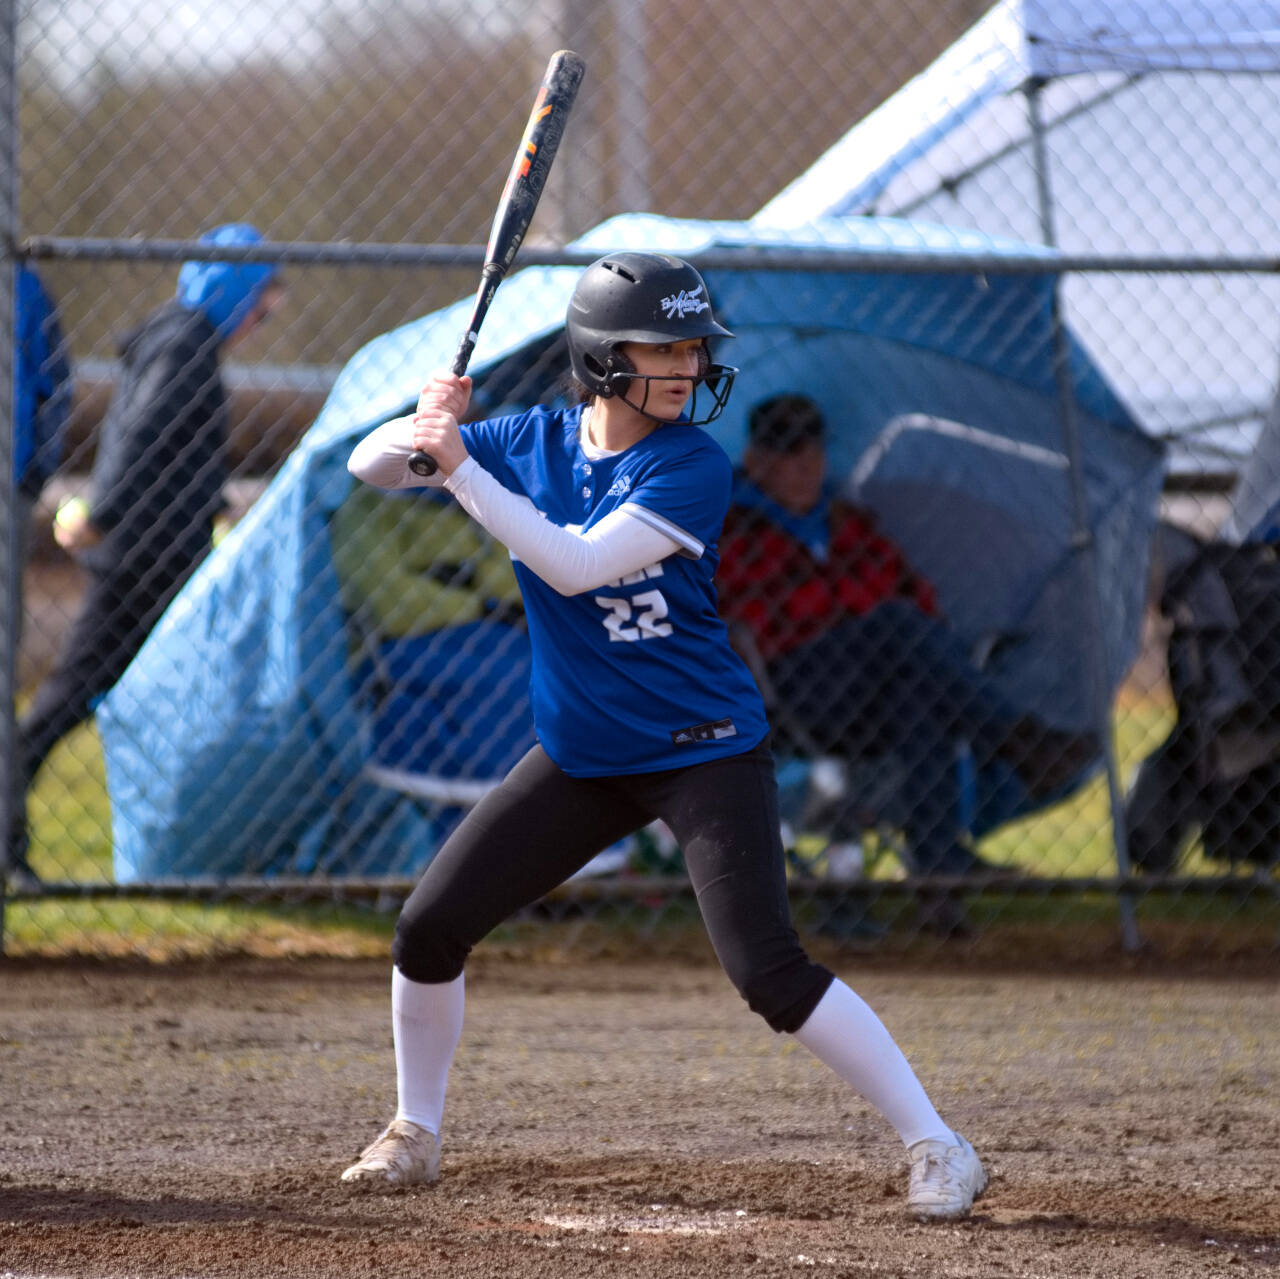 DAILY WORLD FILE PHOTO Elma’s Carly Gay, seen here in a file photo, had two hits and two RBI in Elma’s 13-10 victory over Montesano on Friday in Elma.